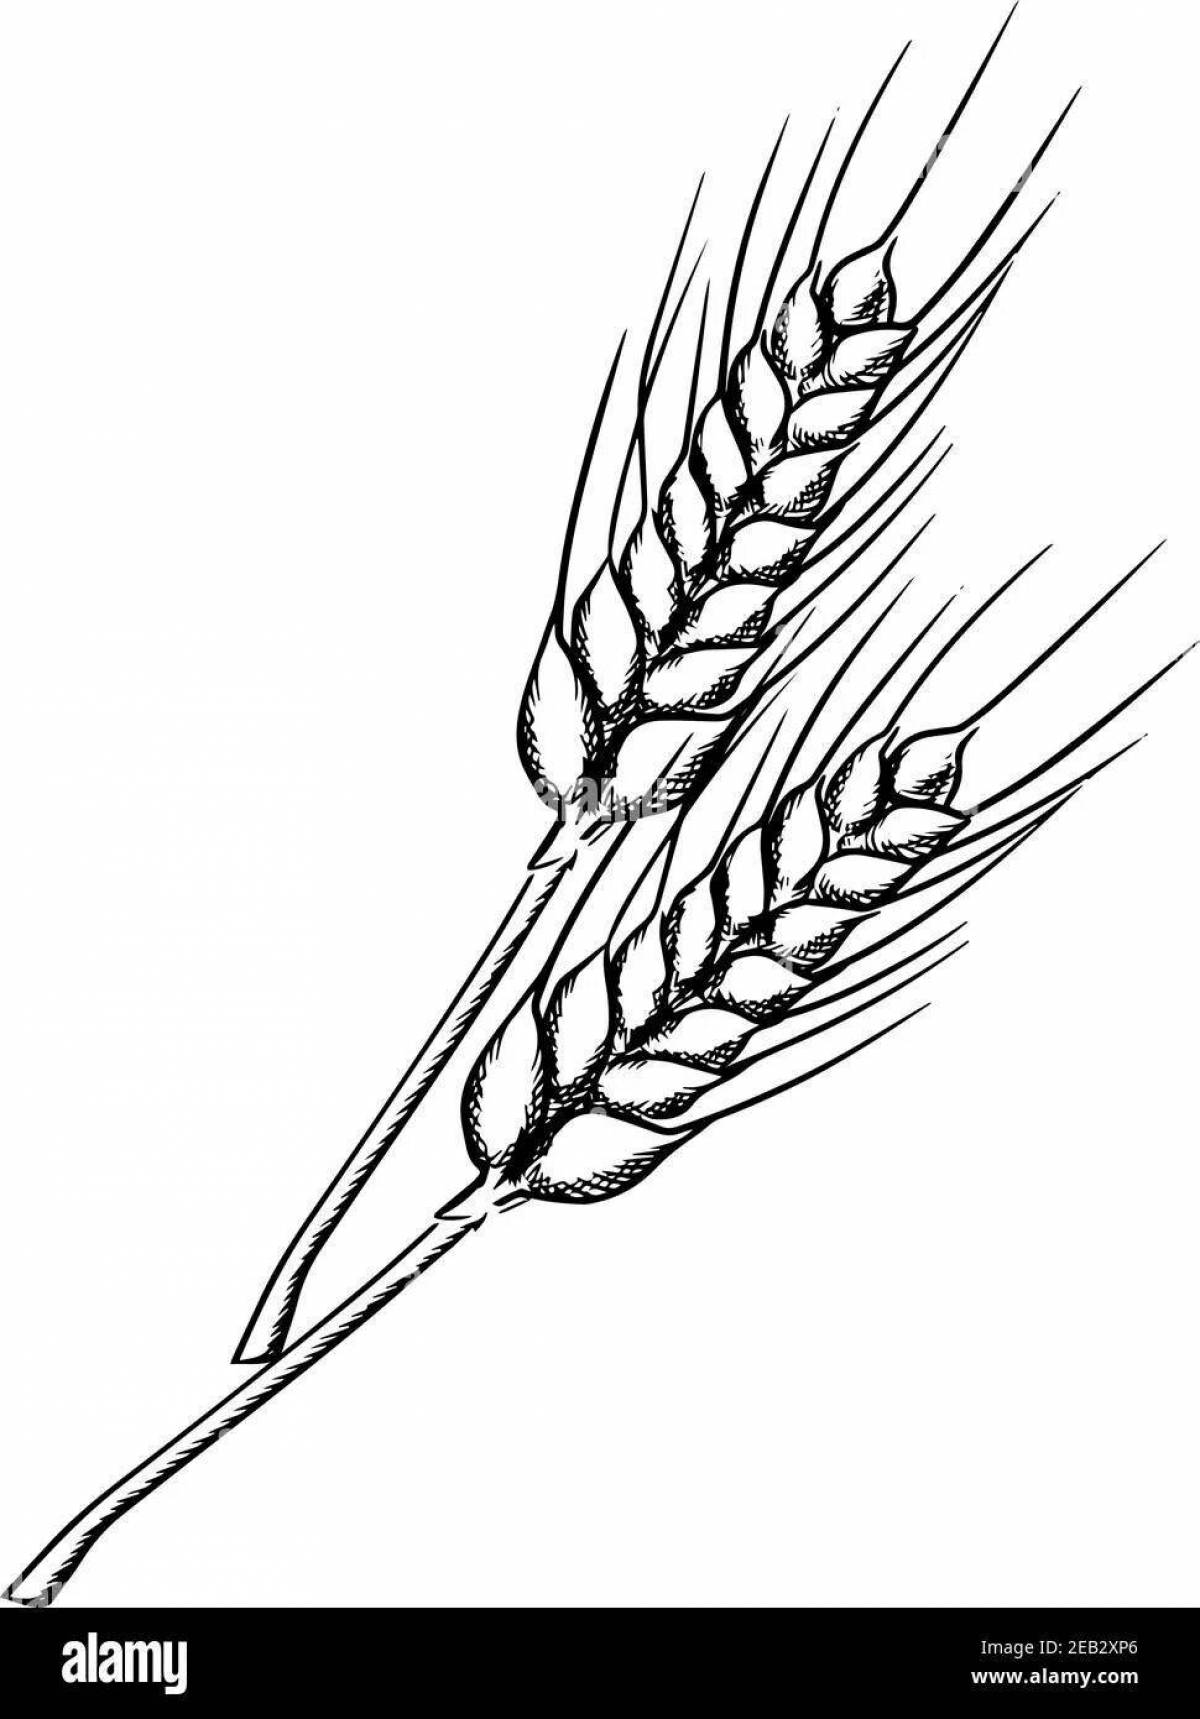 Delightful wheat ear coloring book for kids